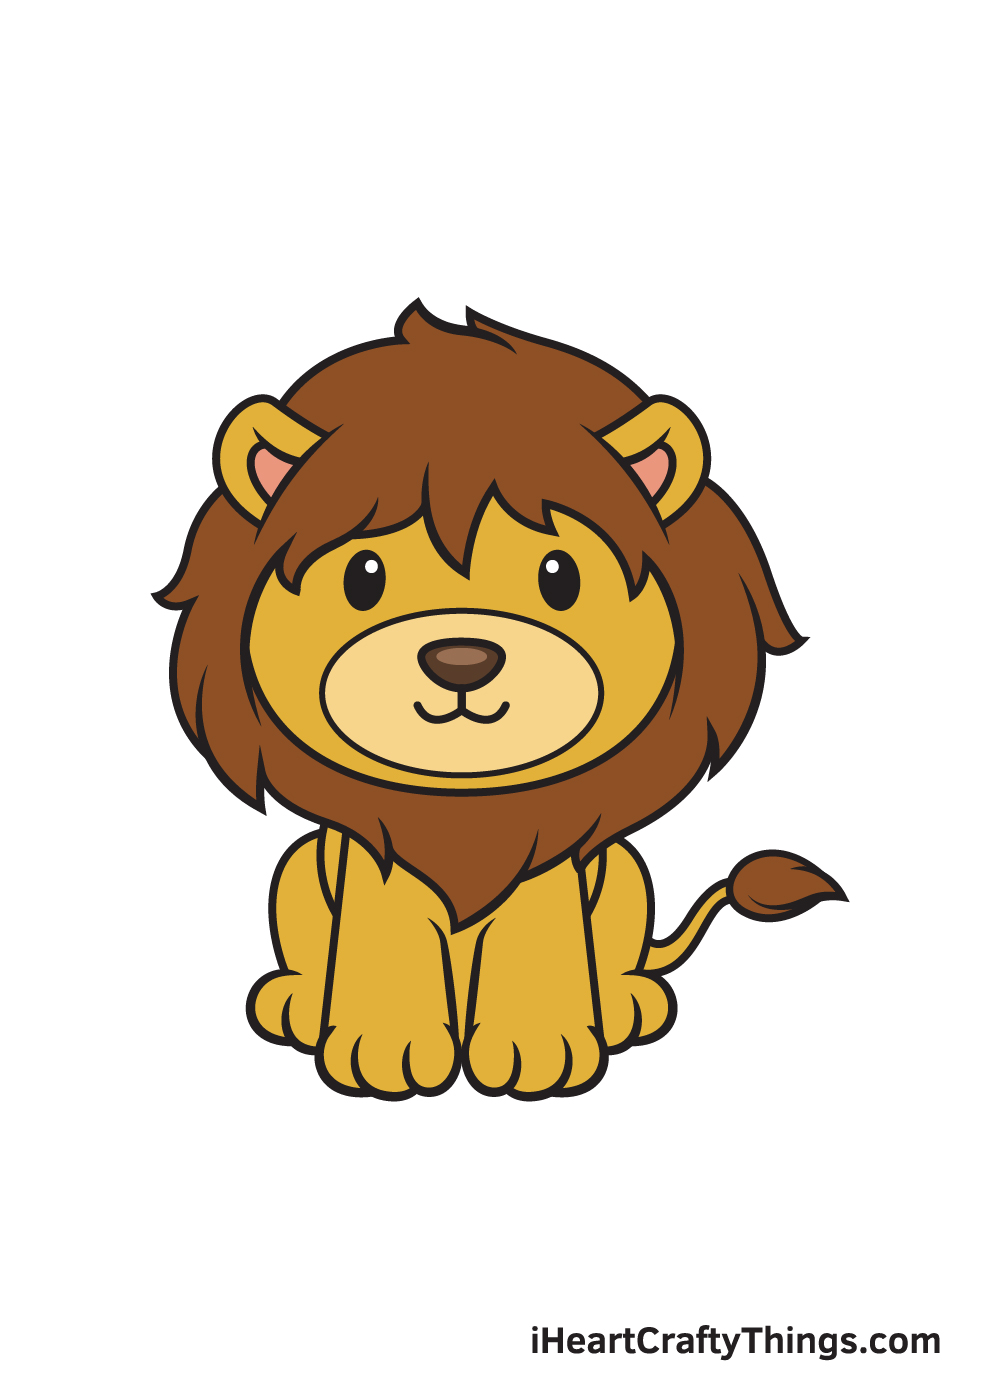 Lion Drawing - How To Draw A Lion Step By Step